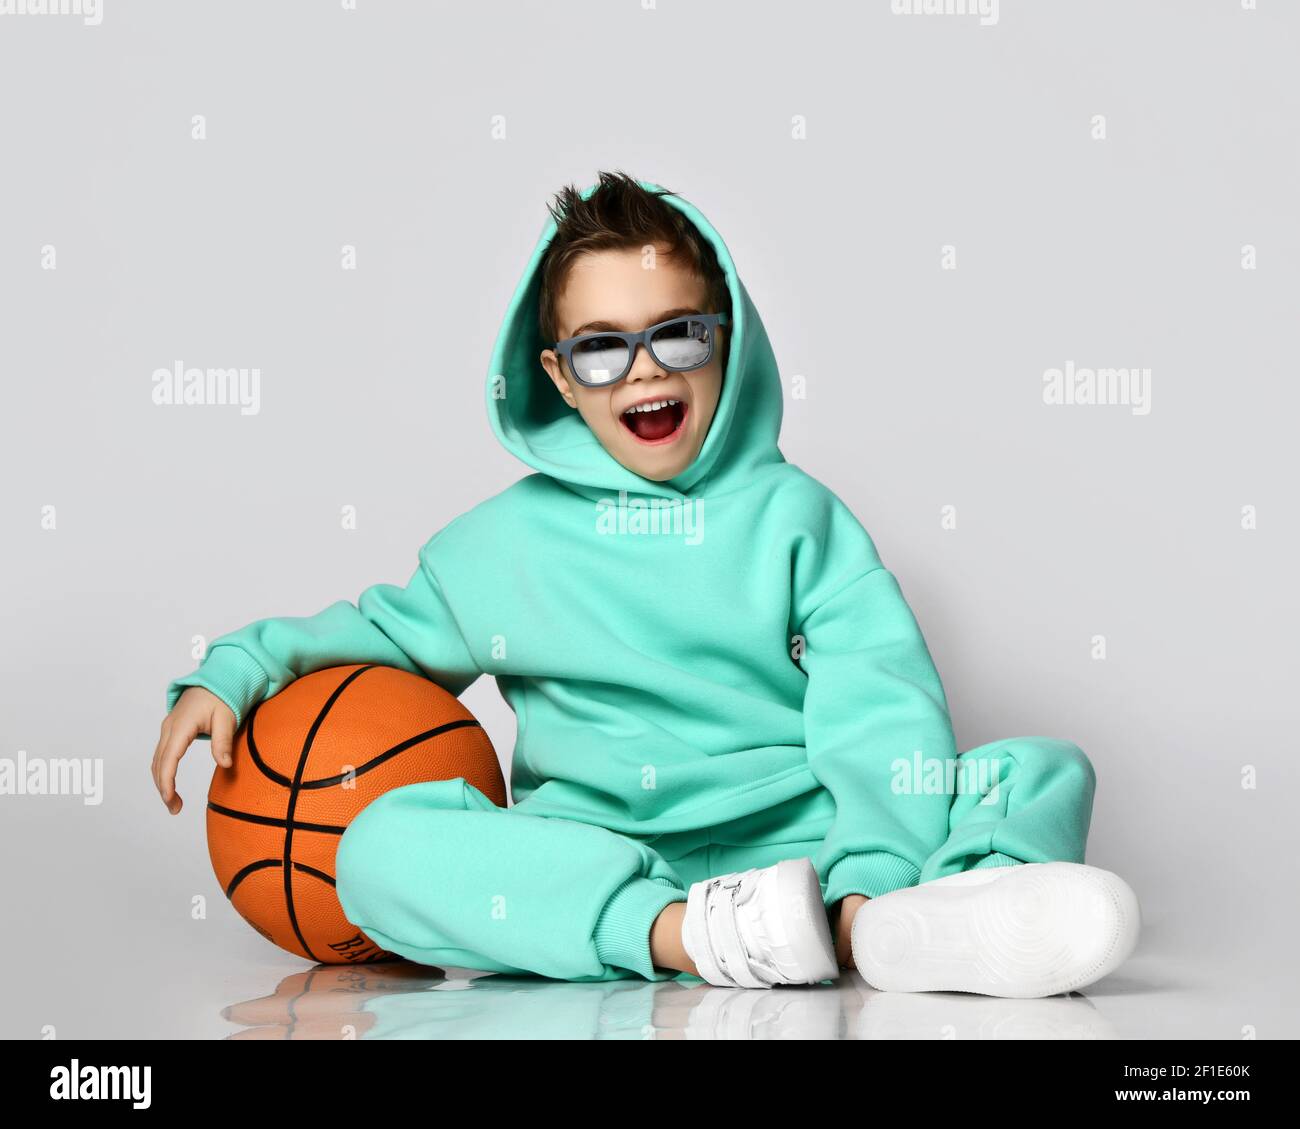 Happy screaming frolic kid boy in modern green, mint color sportswear hoodie, pants and sneakers sitting with basketball Stock Photo